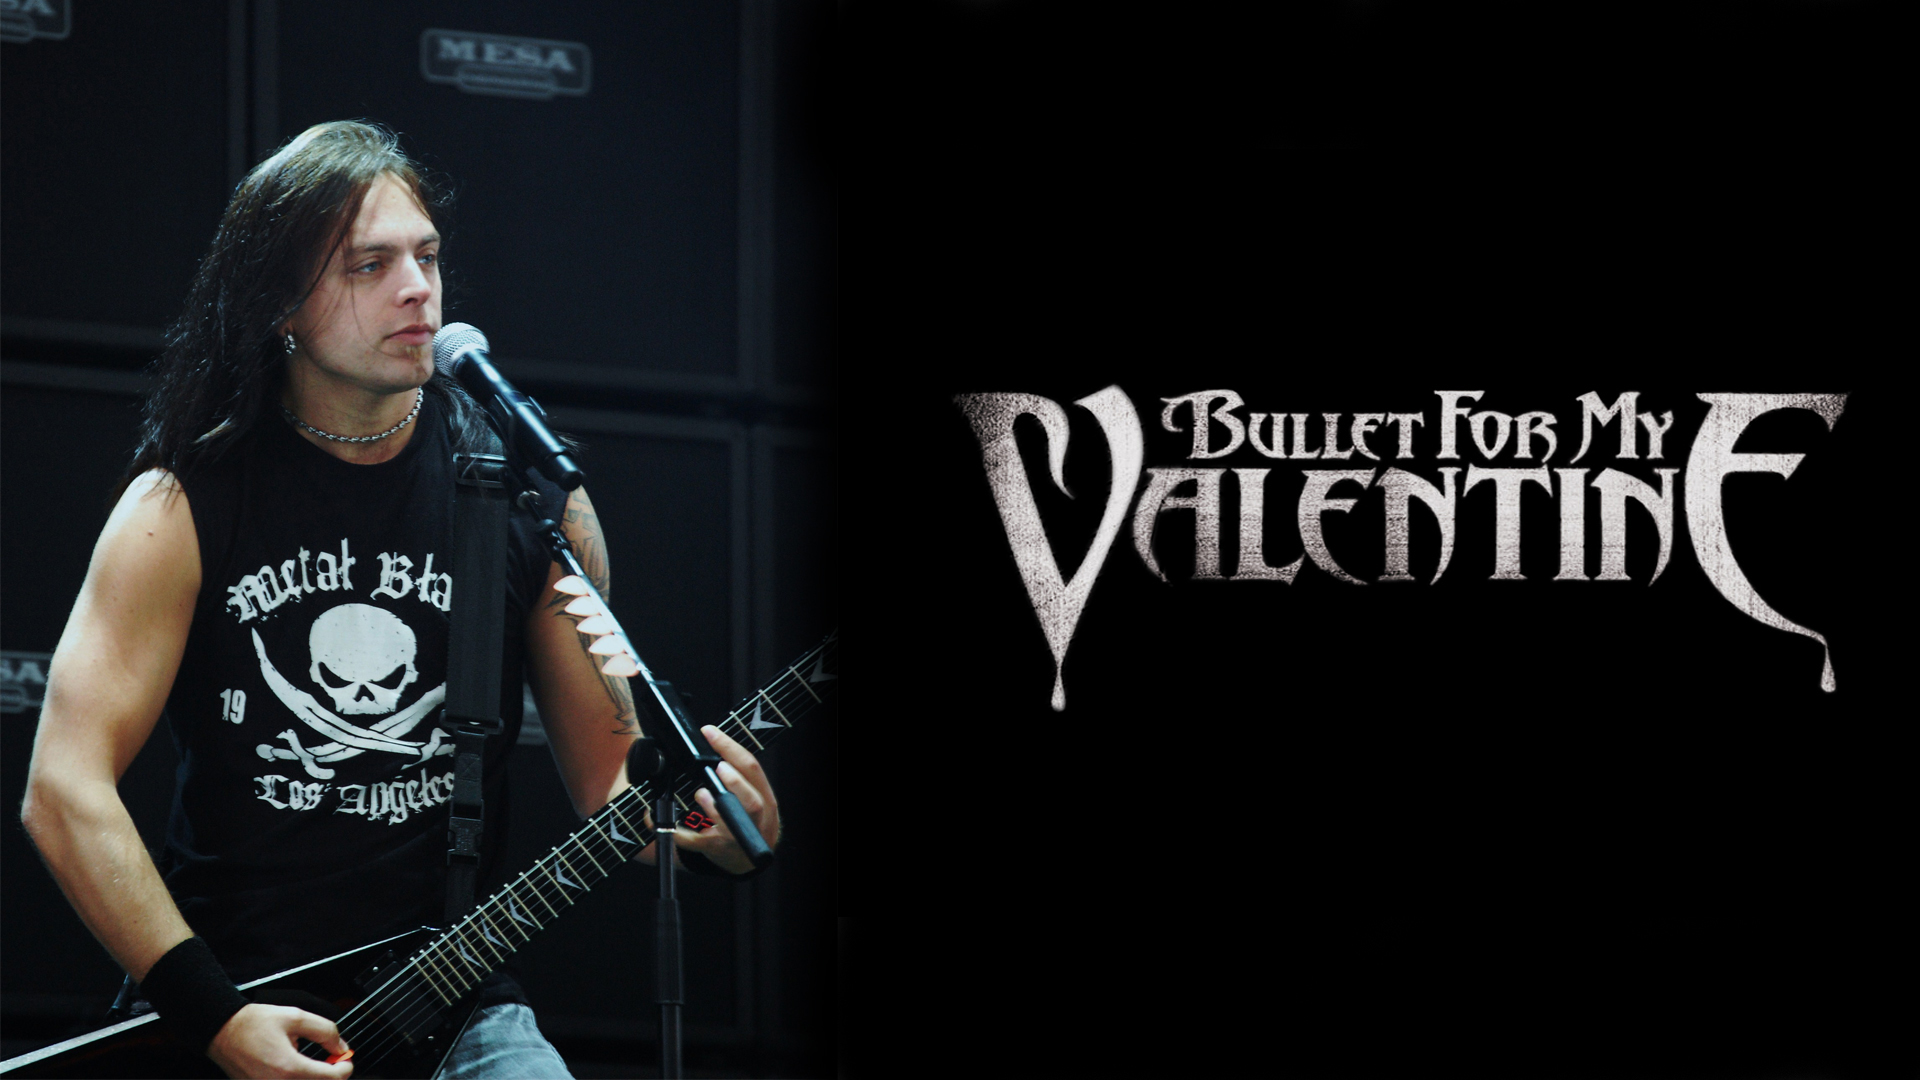 High Definition Bullet For My Valentine background